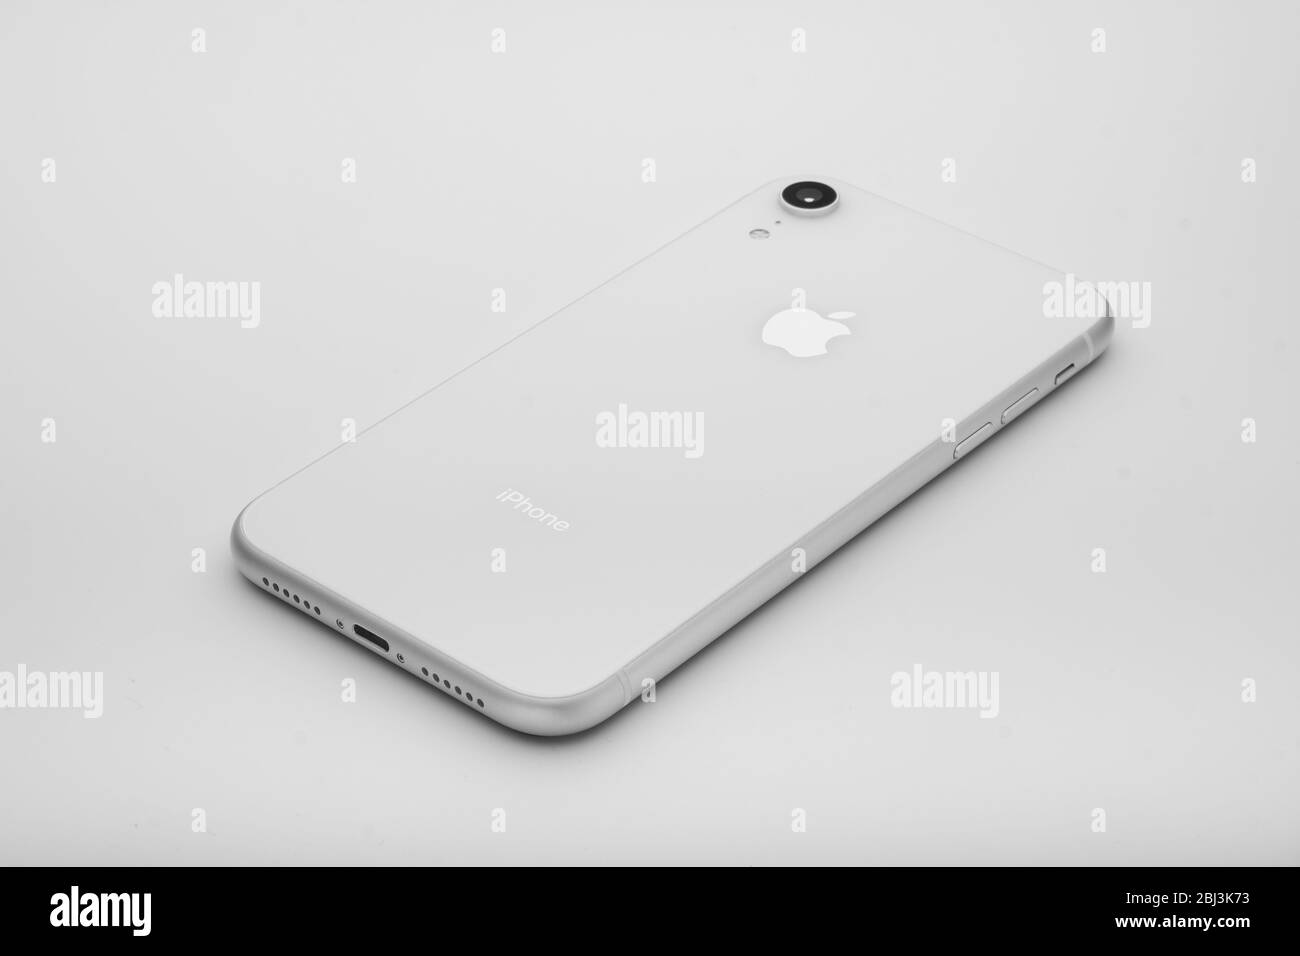 Moscow/Russia-1/4/20: The back side of iPhone XR in white color. iPhone XR is a smartphone designed and manufactured by Apple Inc. It is the twelfth g Stock Photo